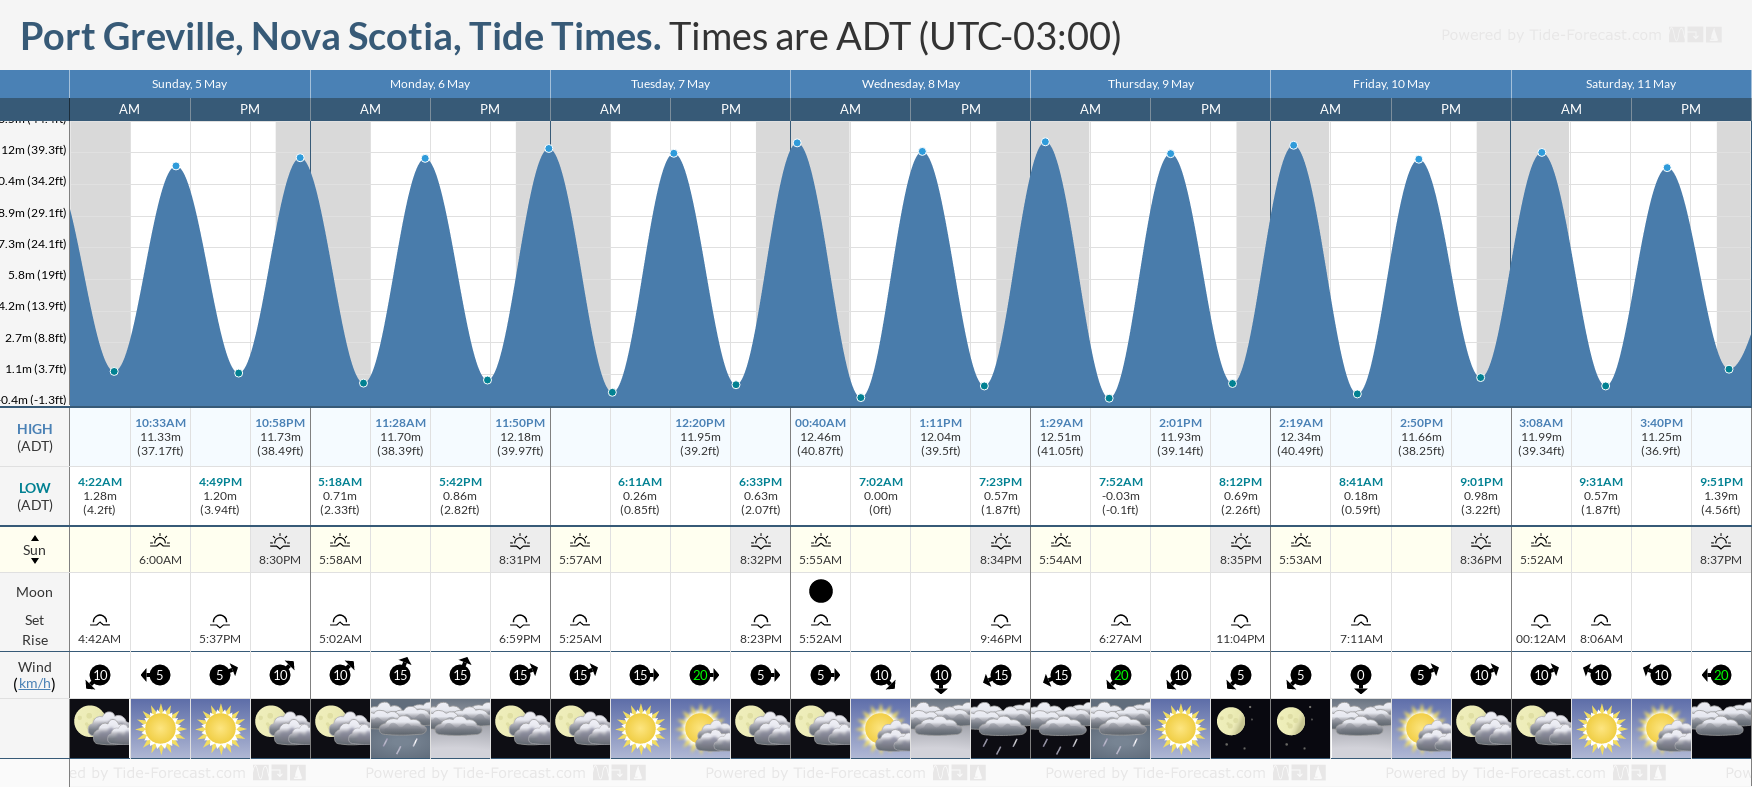 Port Greville, Nova Scotia Tide Chart including high and low tide tide times for the next 7 days